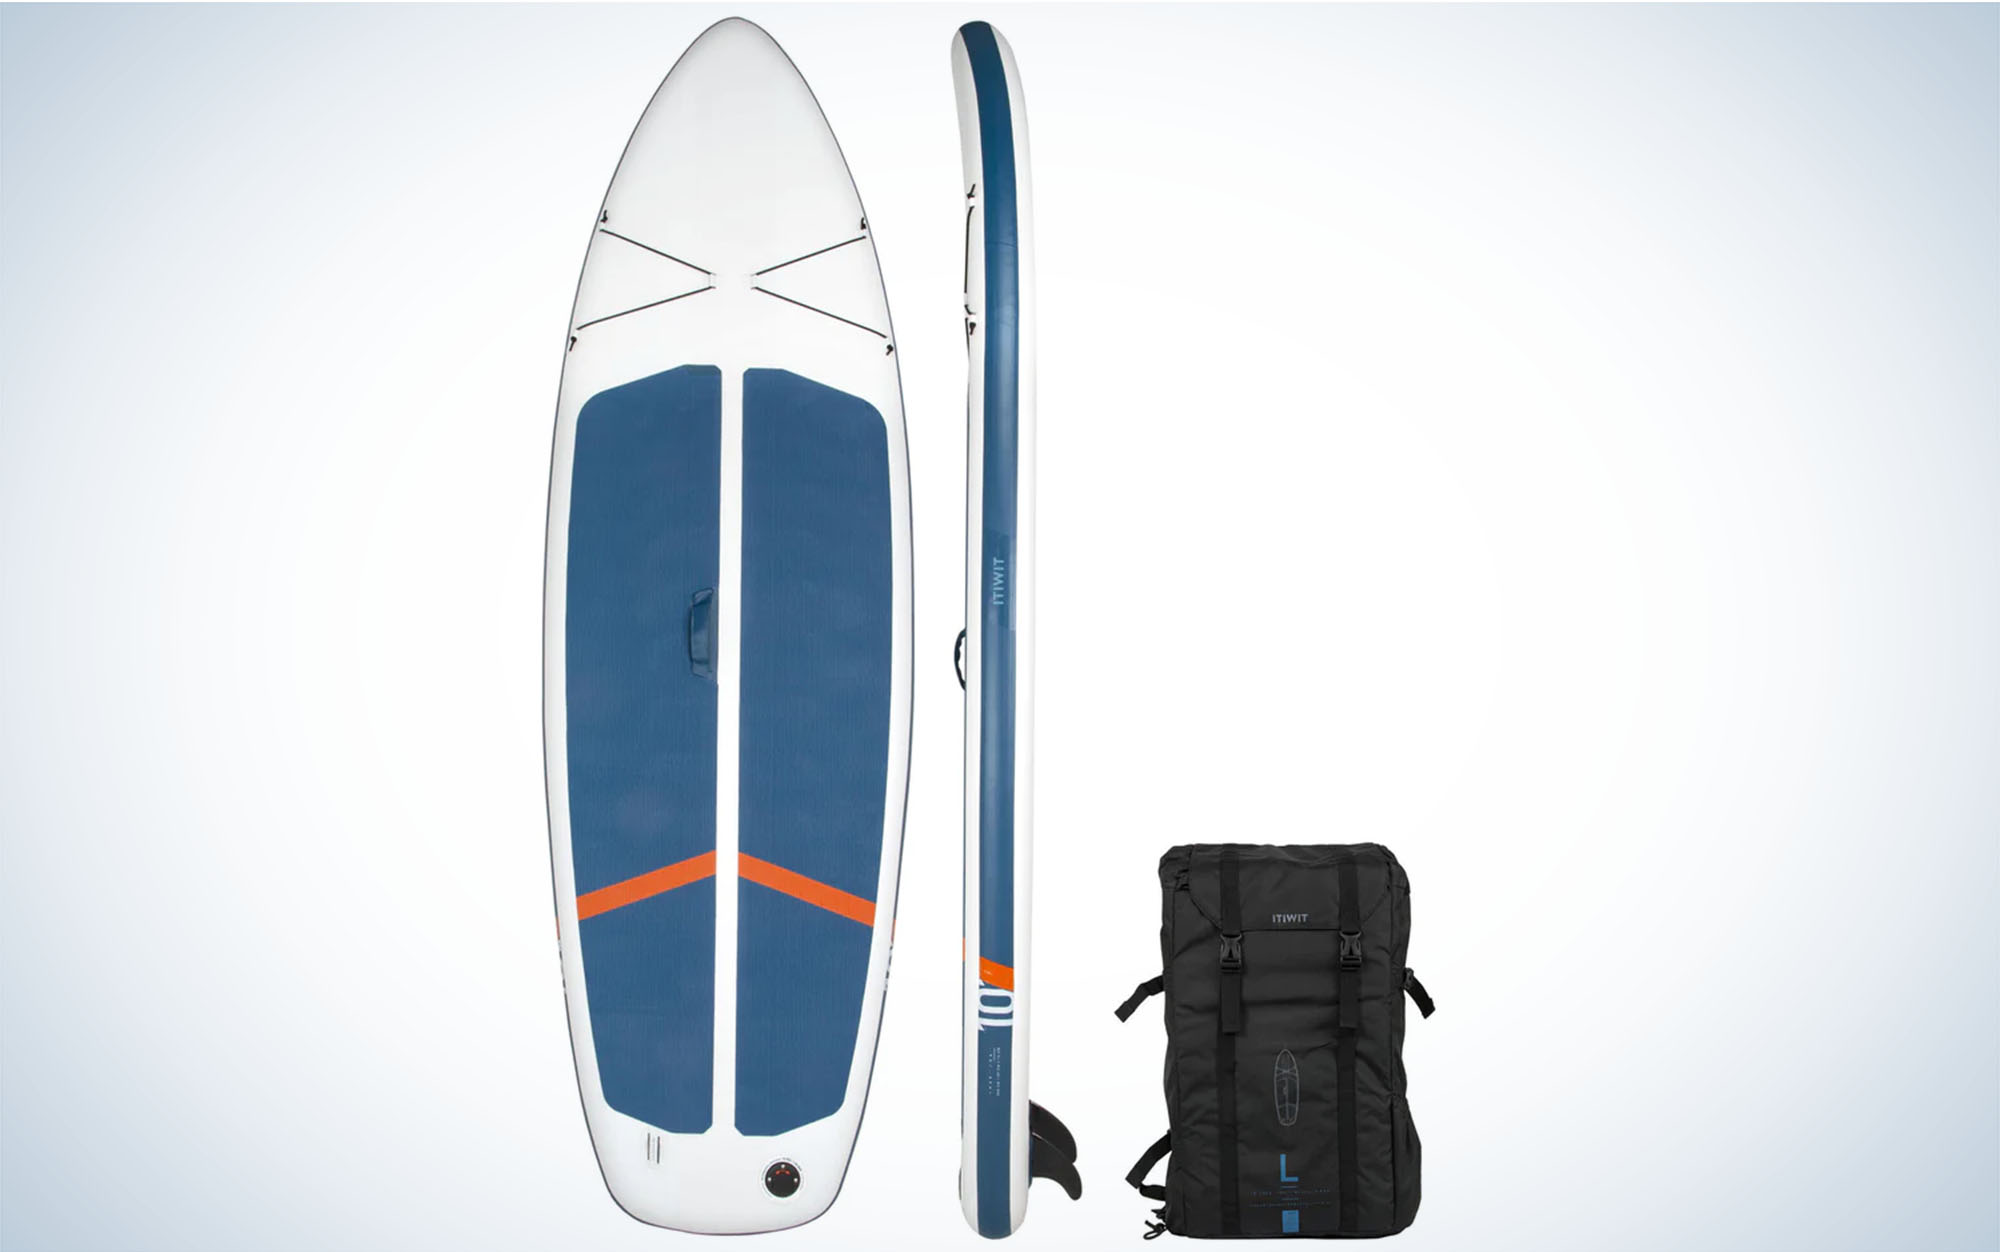 The Decathlon Itiwit Adult Ultra Compact is one of the best paddle boards.